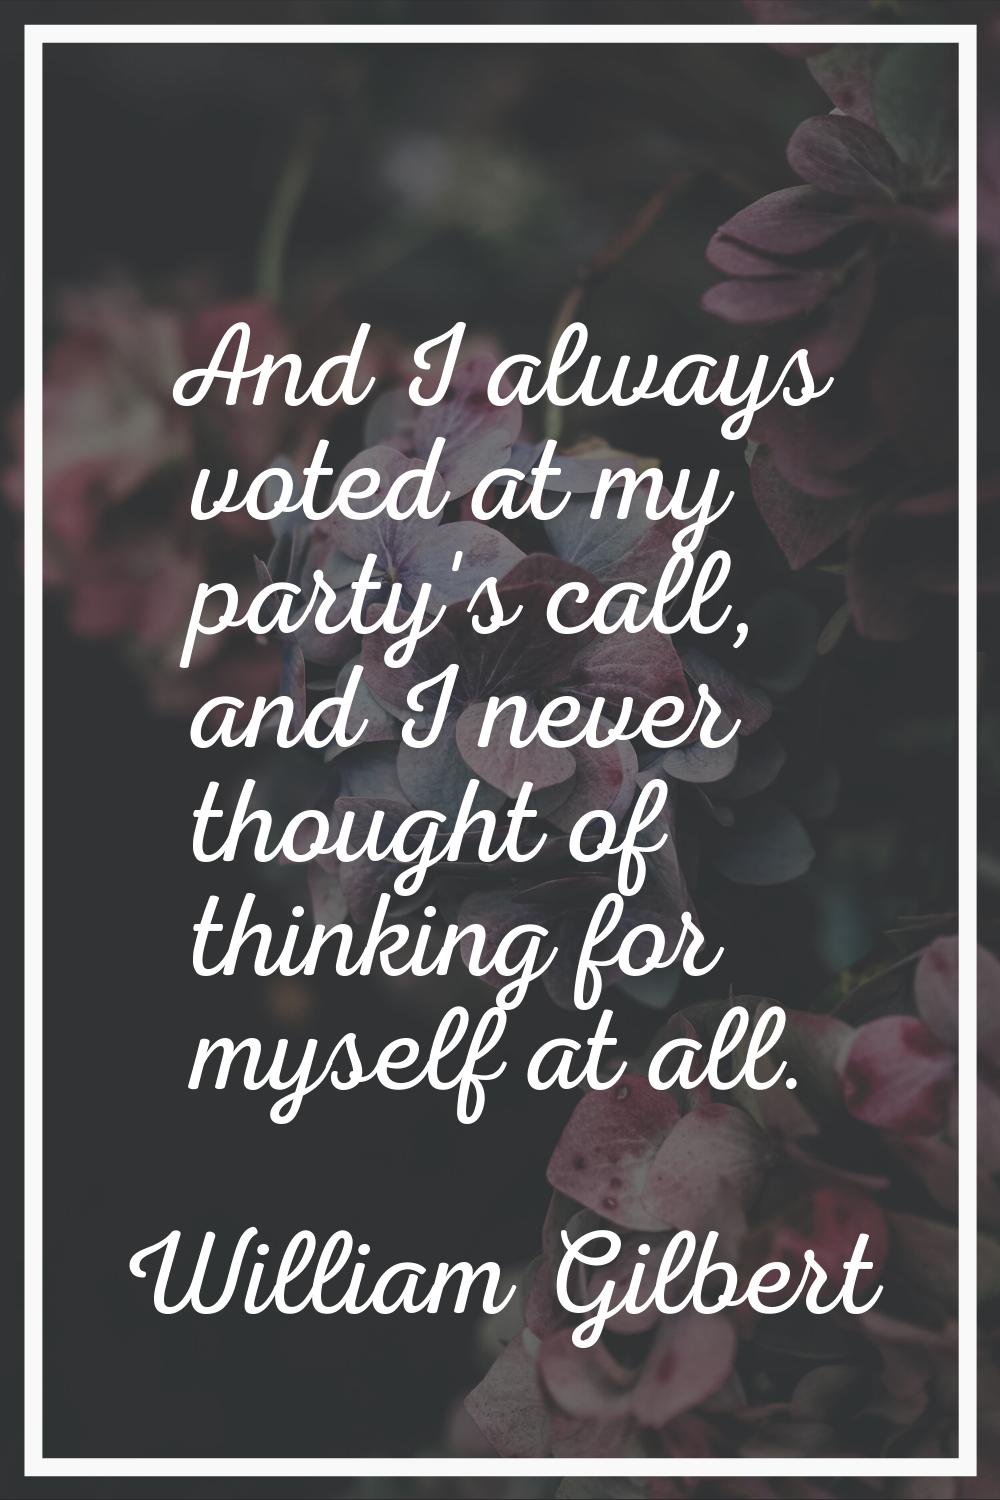 And I always voted at my party's call, and I never thought of thinking for myself at all.